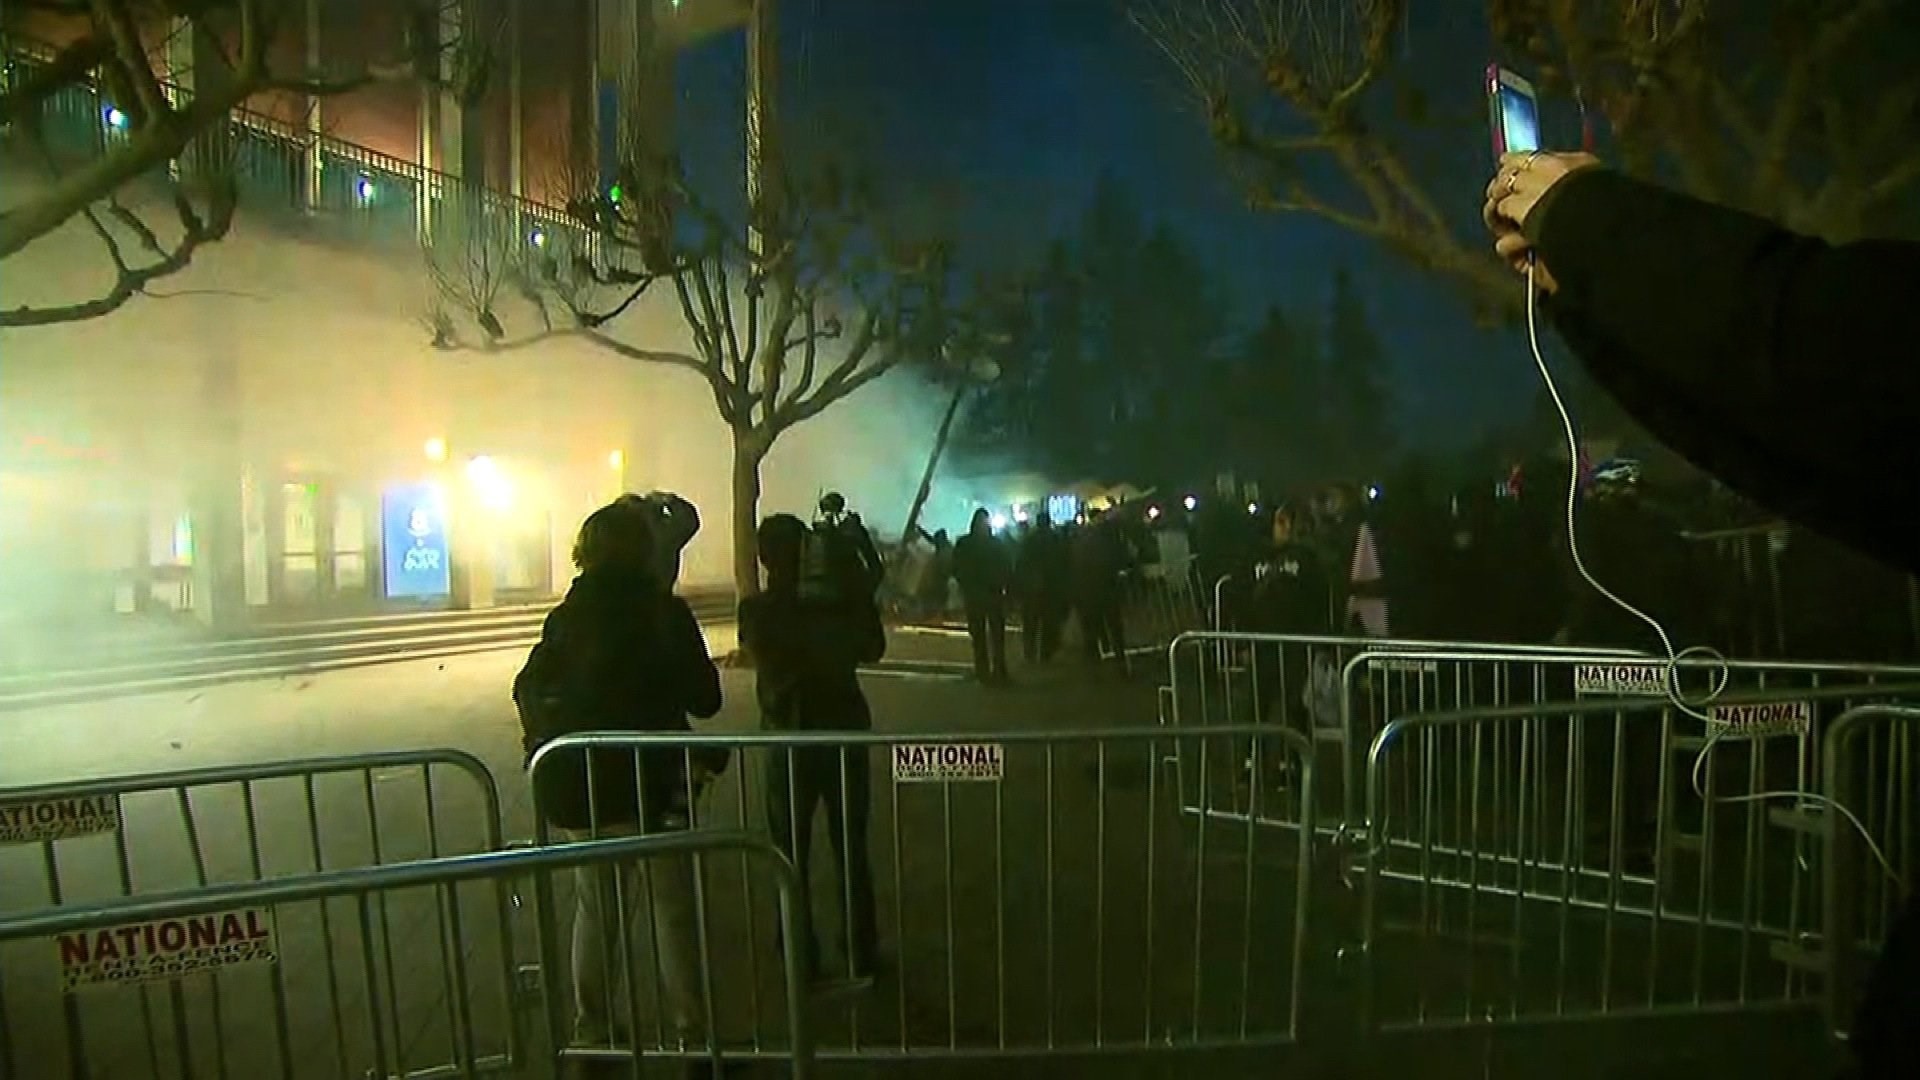 Protests turned violent on the campus of U.C. Berkeley where right wing speaker Milo Yiannopoulos